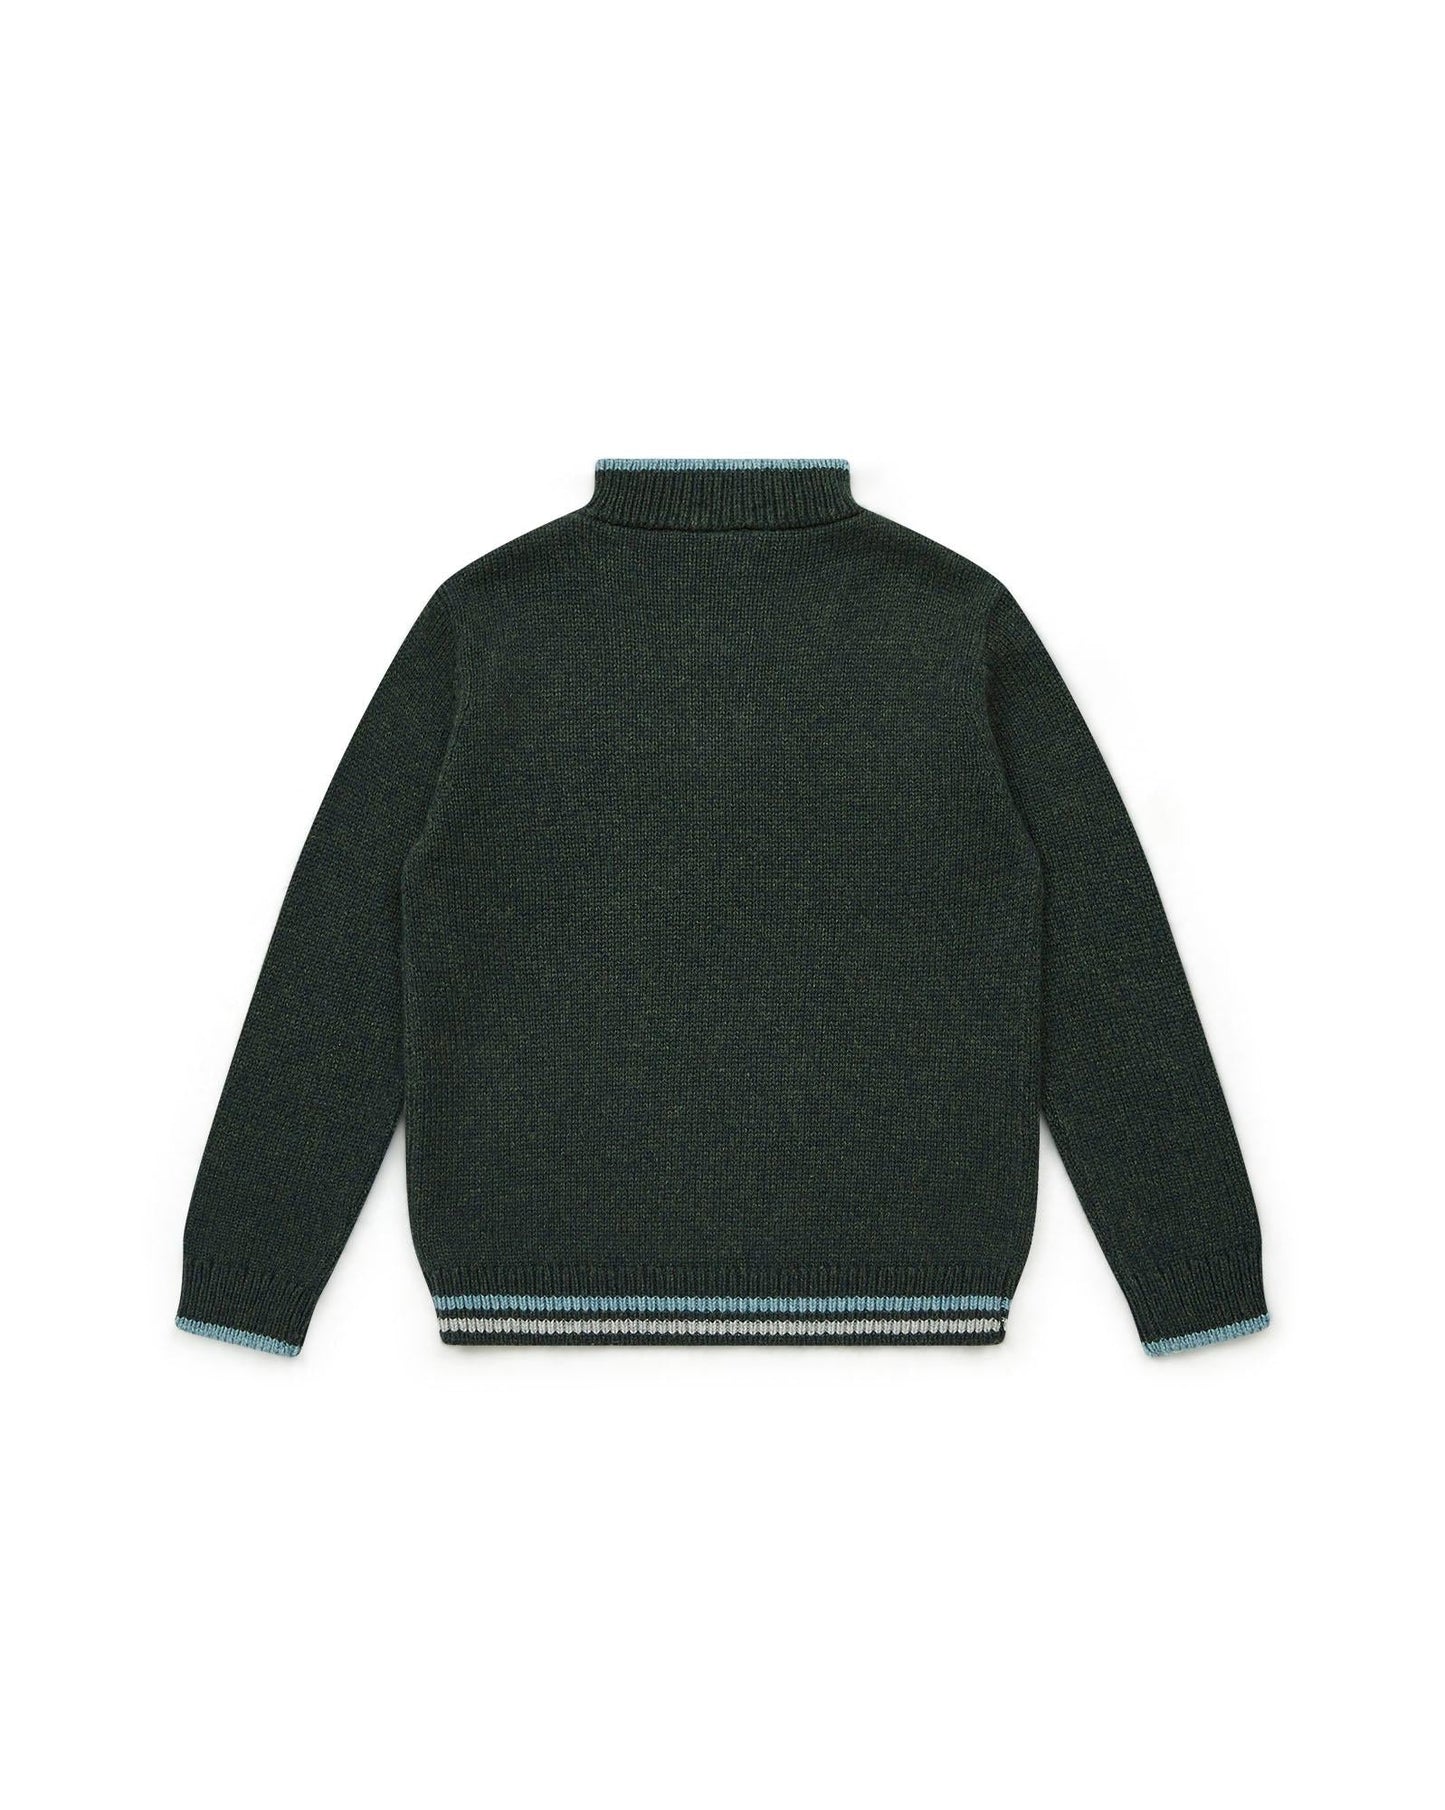 Sweater Boy knitted